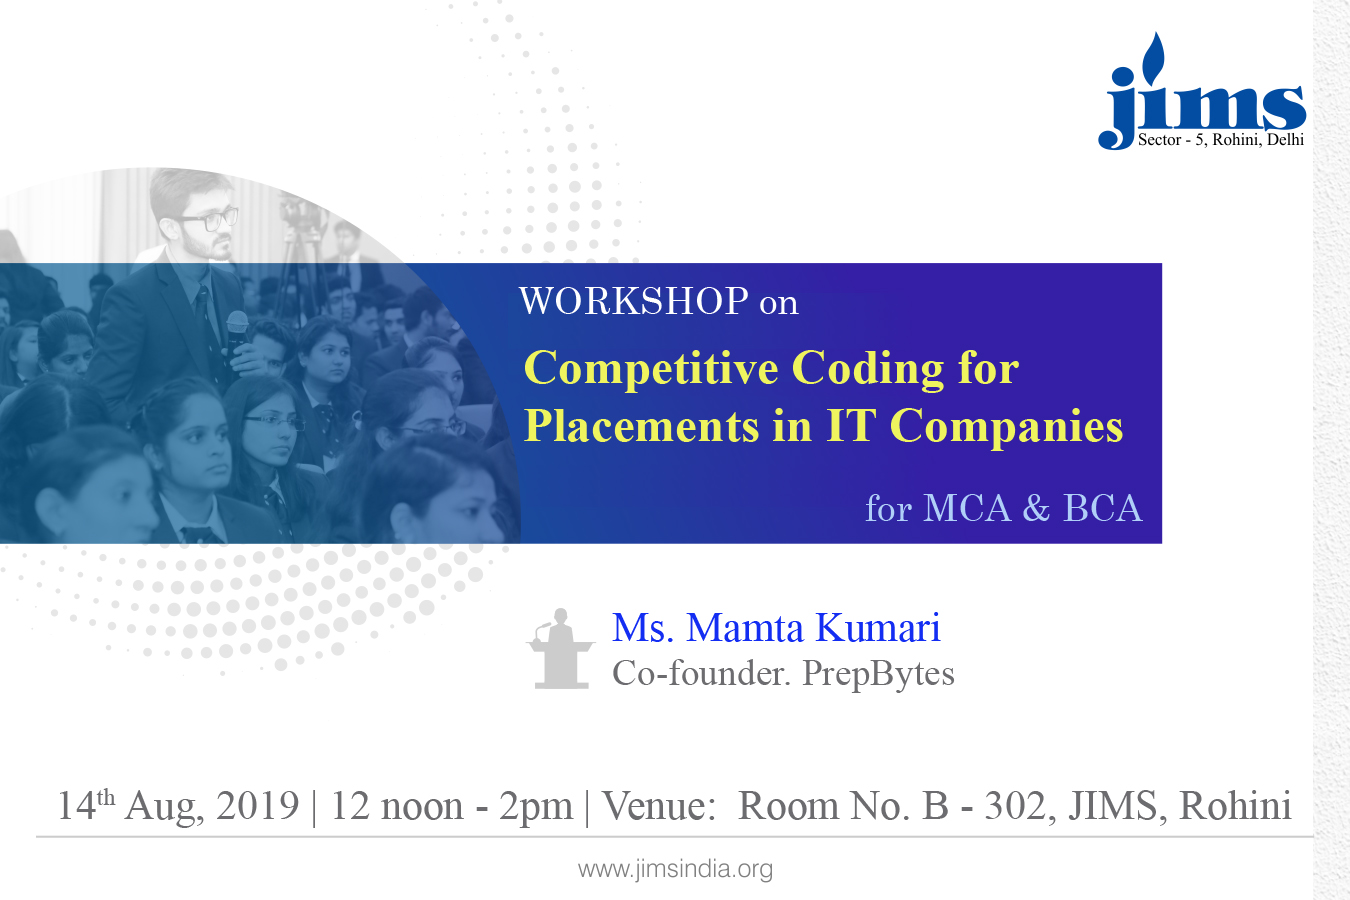 JIMS, Rohini is organizing a workshop on Competitive Coding for Placements in IT Companies for MCA and BCA students